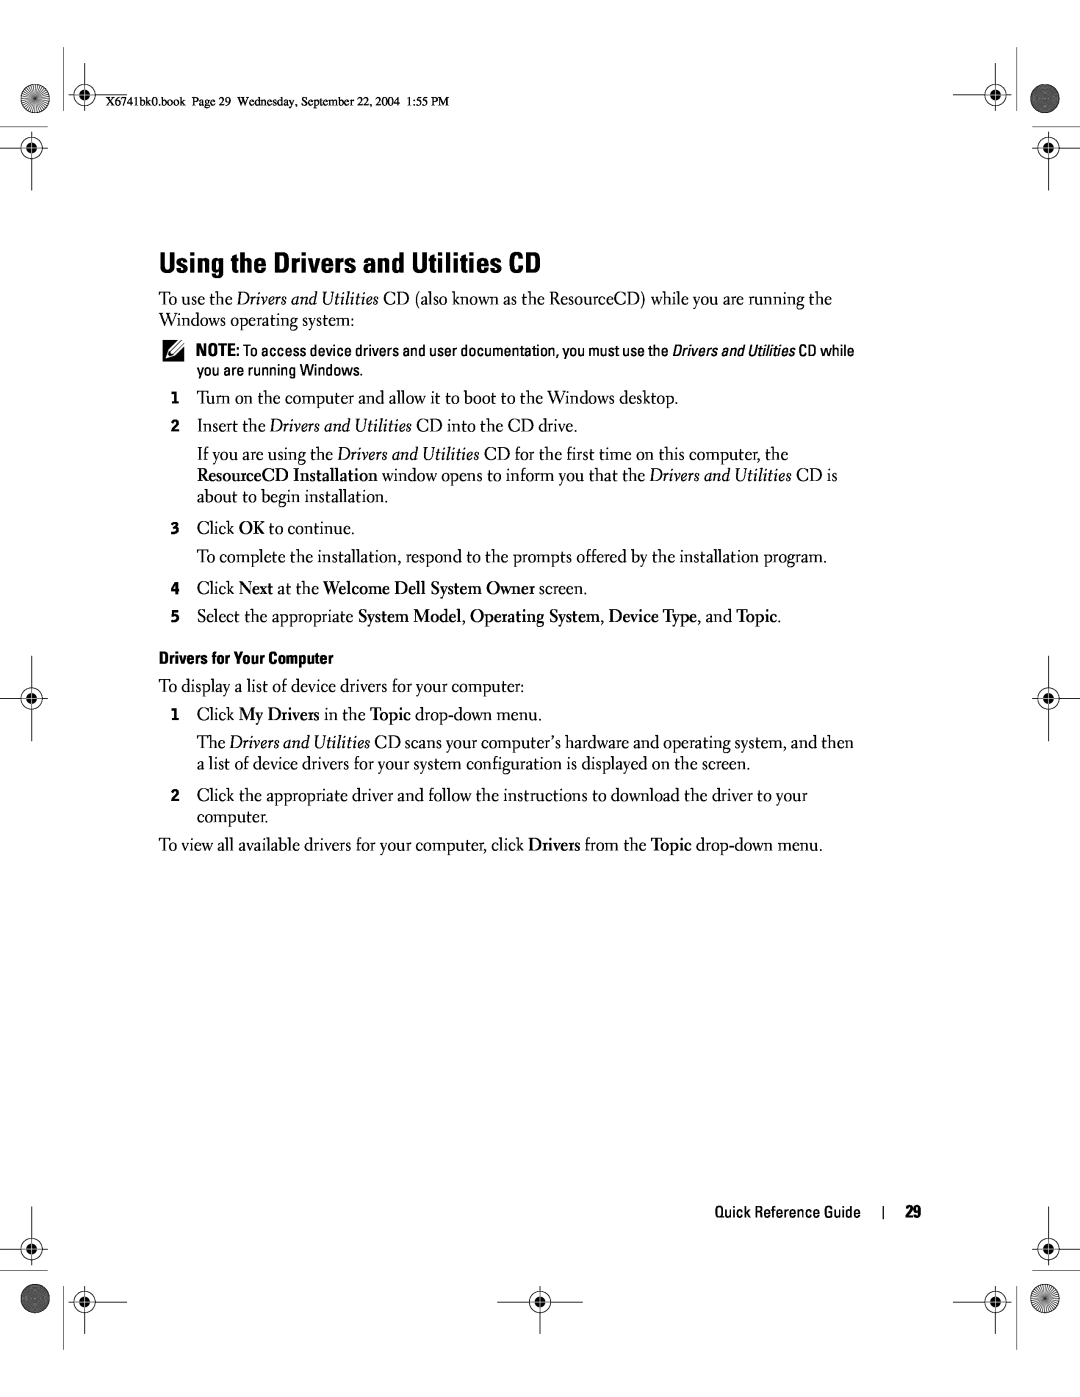 Dell 170L manual Using the Drivers and Utilities CD, Drivers for Your Computer 